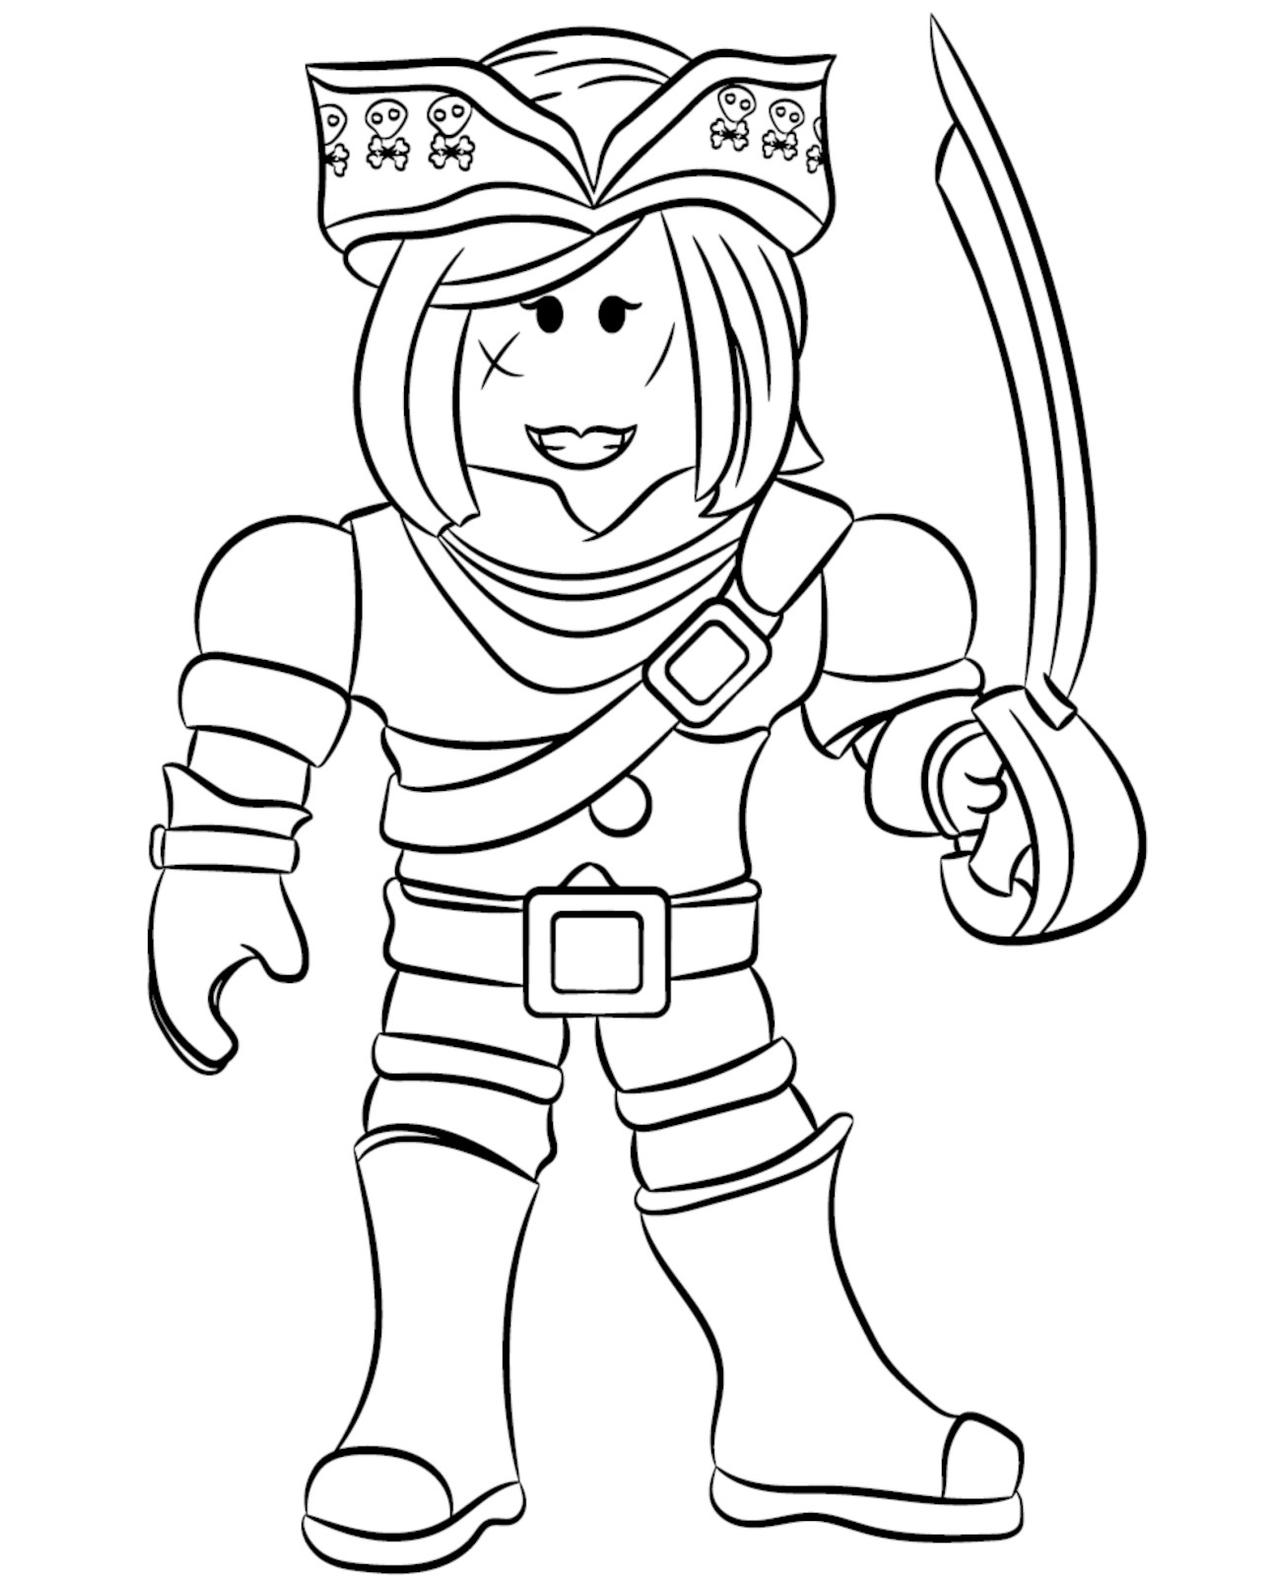 Rblox coloring page ezebel the pirate queen by topcoloringpages on